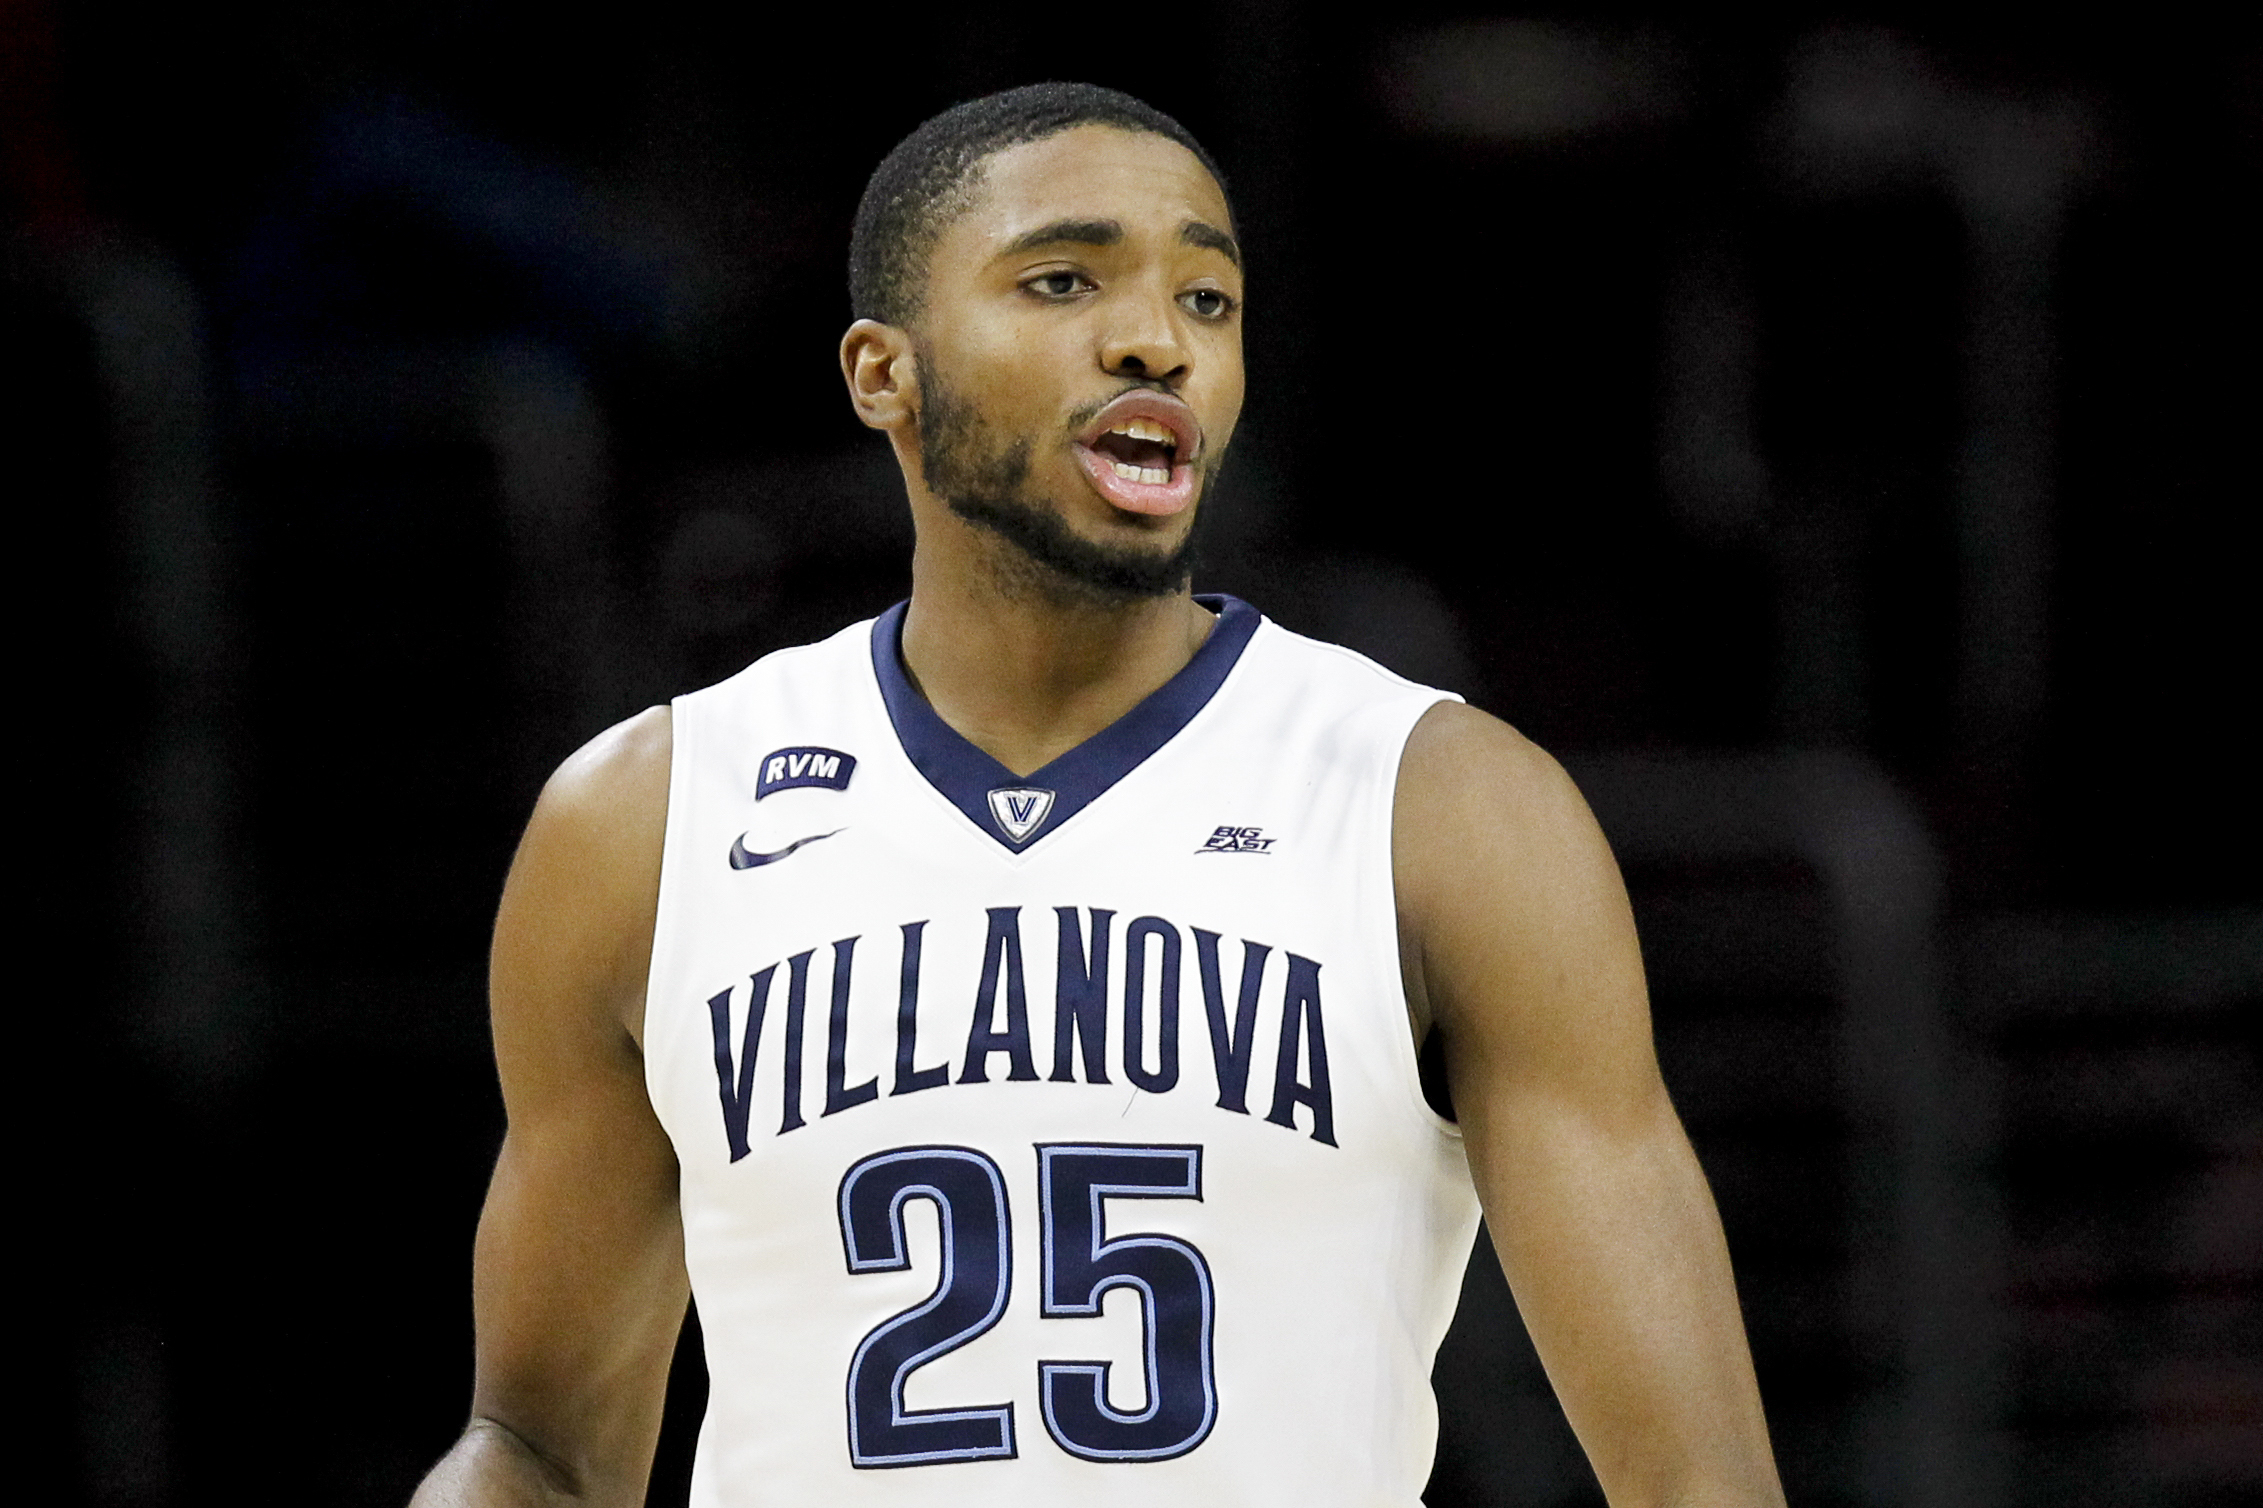 Top NBA draft prospects, No. 10: What Mikal Bridges offers and why